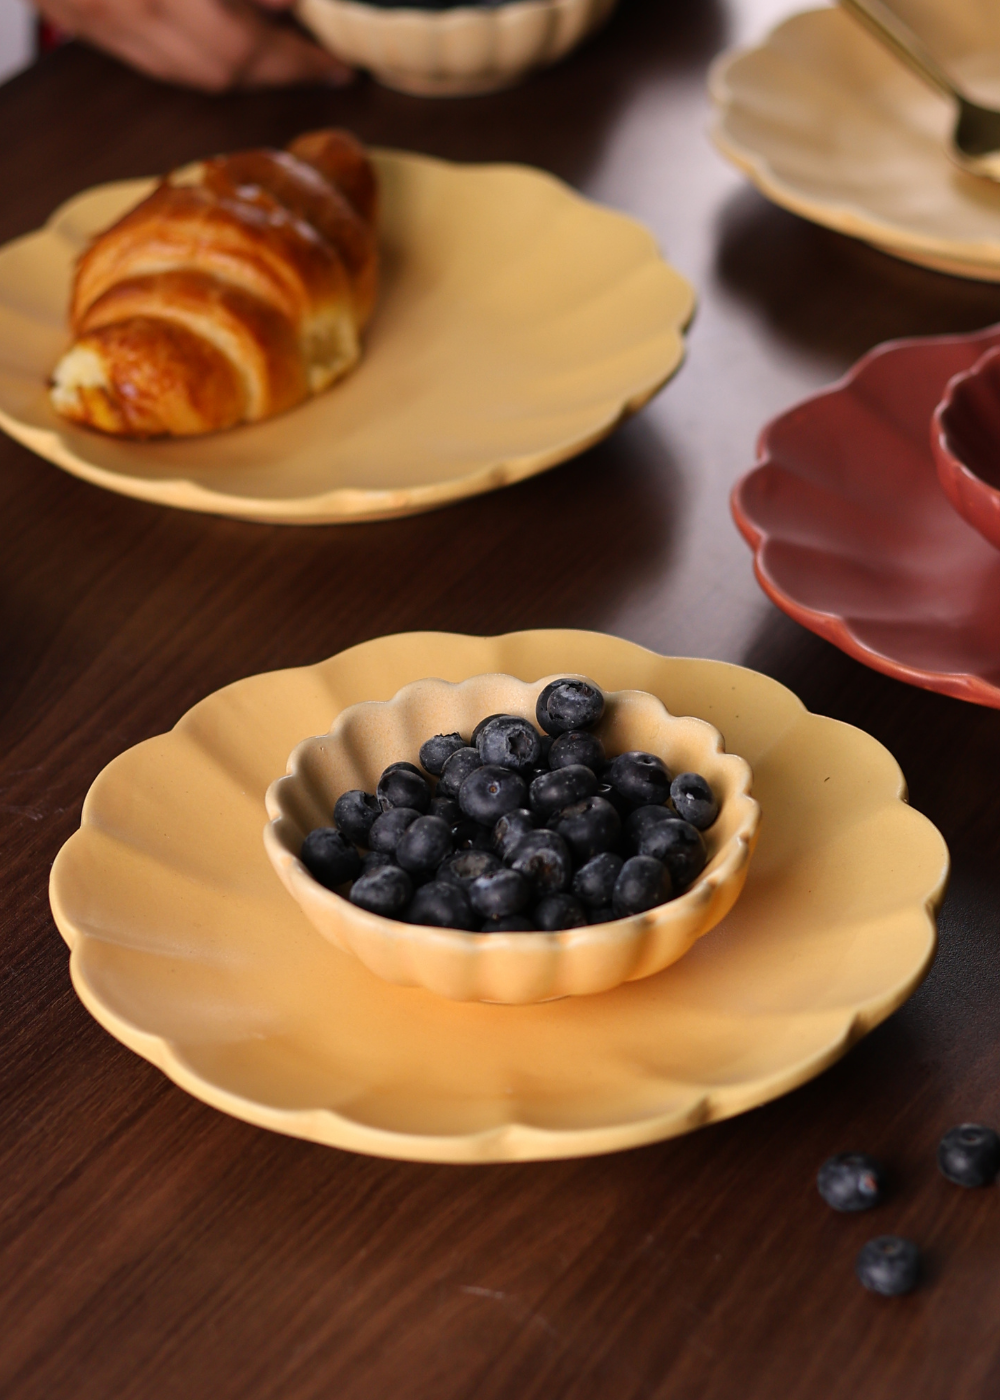 Handmade ceramic bowls & plates with berries 